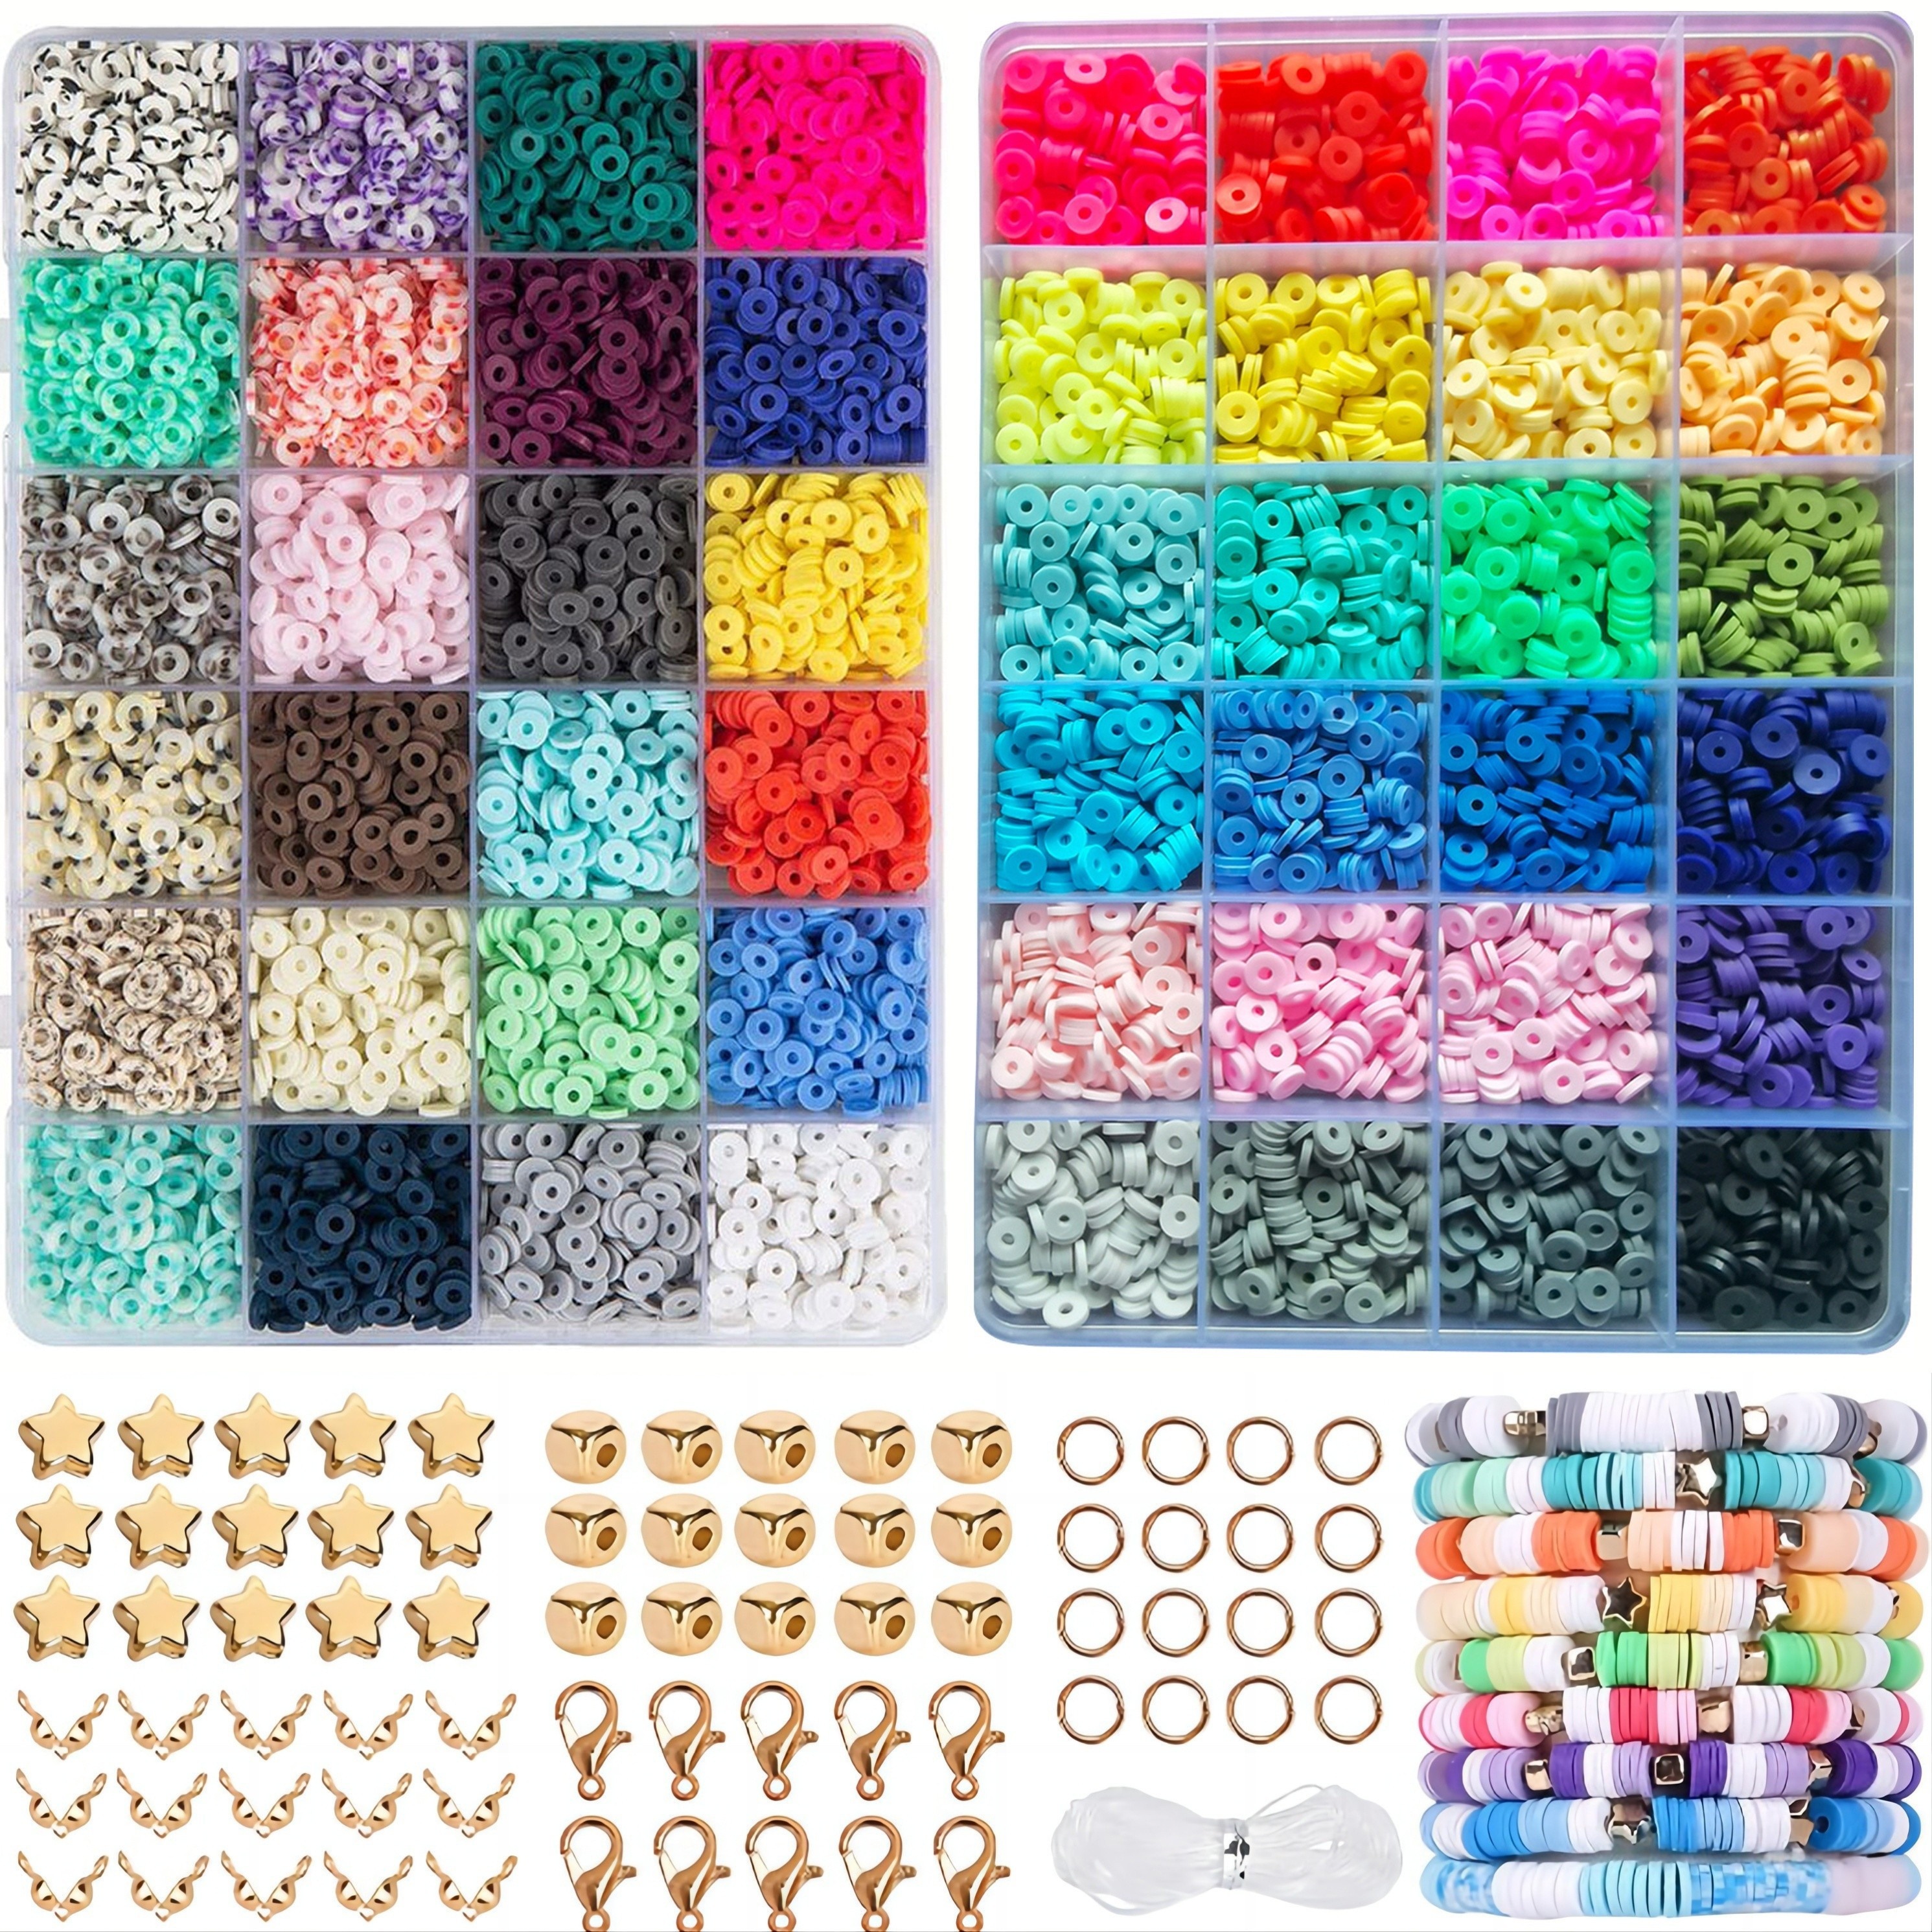  4800Pcs Clay Beads for Jewelry Making Bracelet Kit